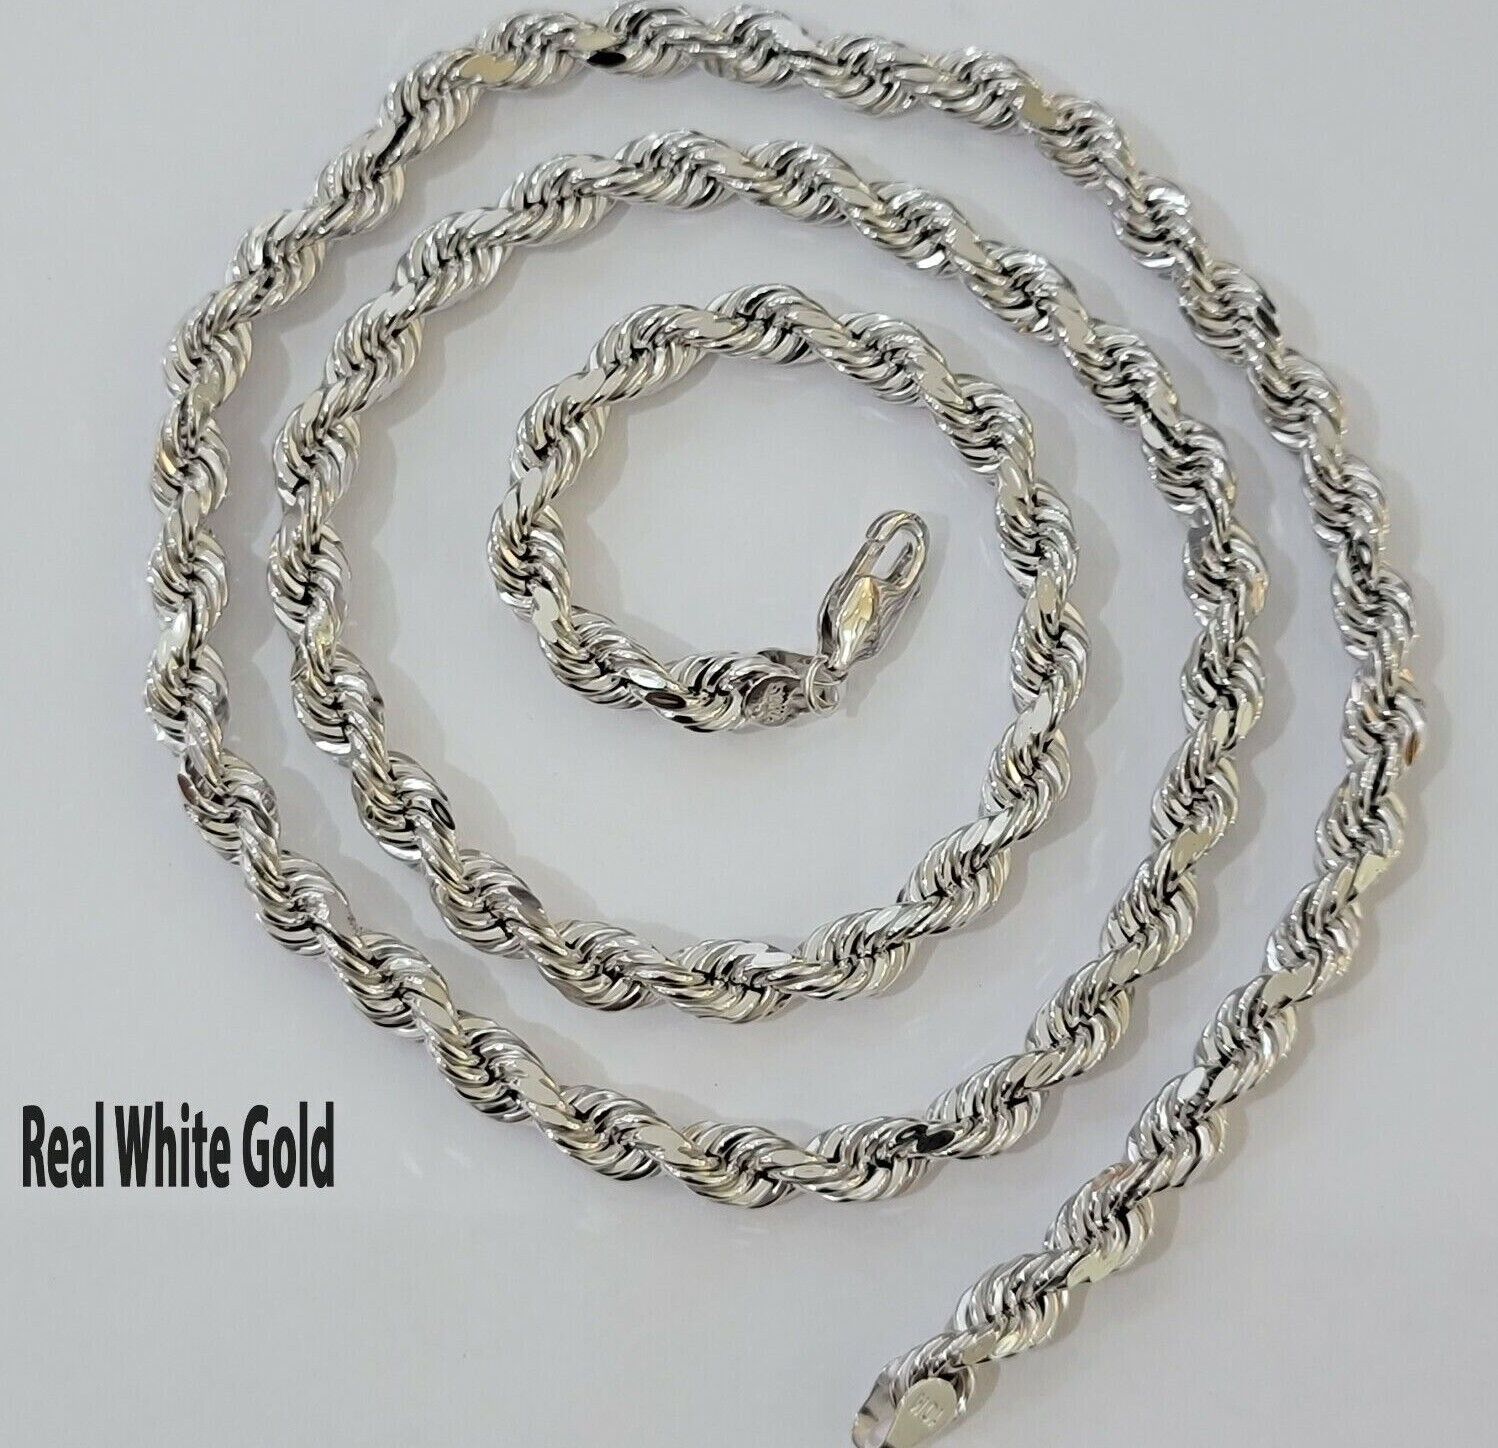 Real 10k White Gold Rope Chain Necklace 22 Inch 6mm Diamond Cuts Mens 10KT SOLID